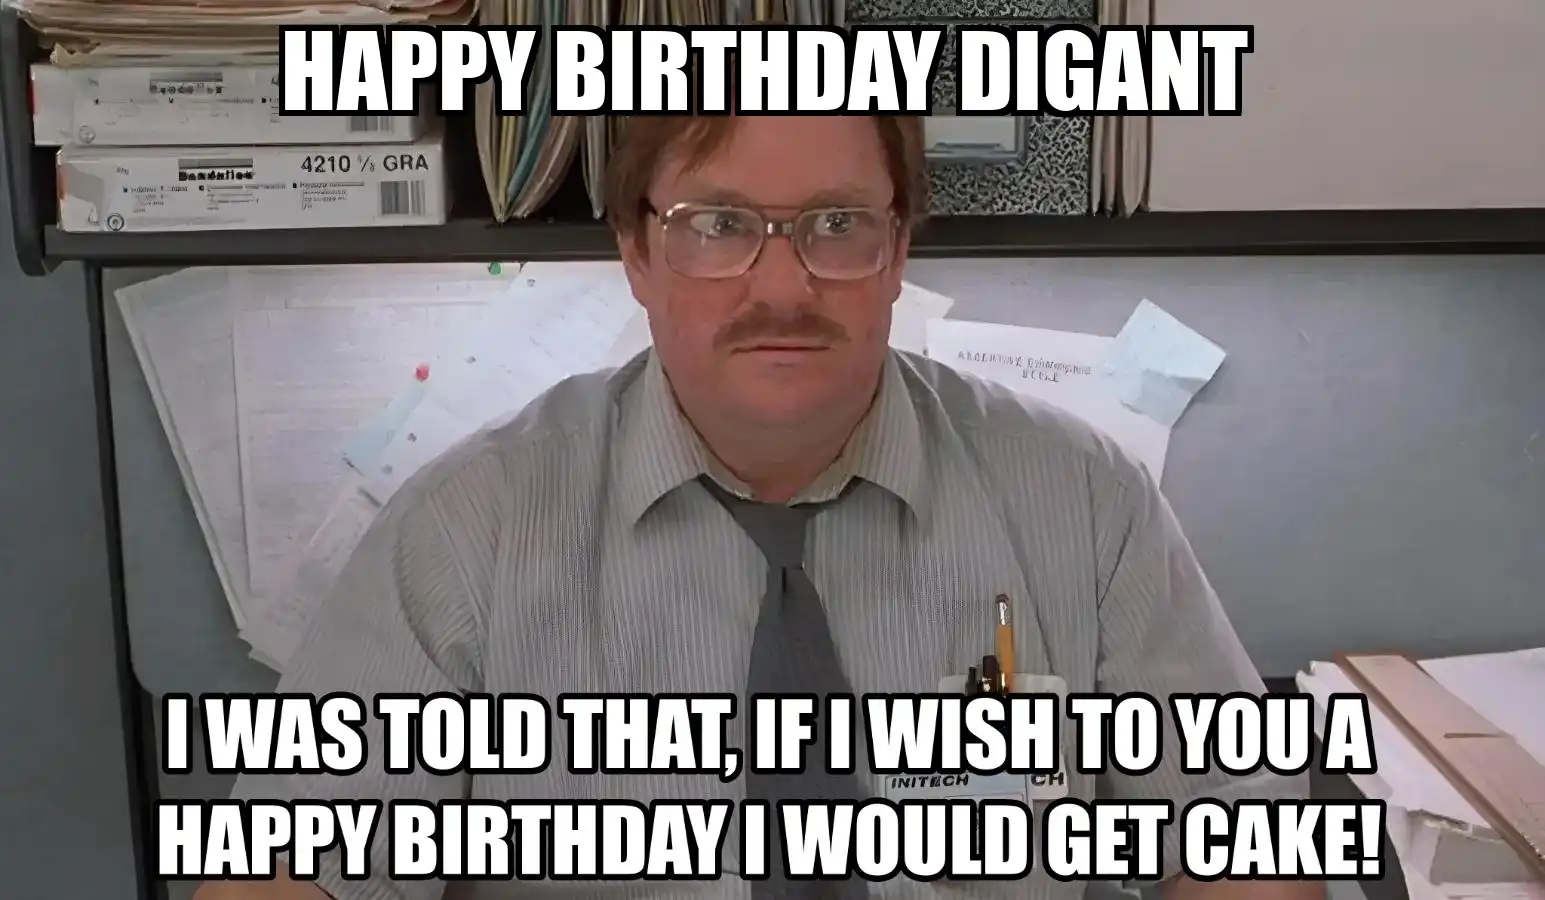 Happy Birthday Digant I Would Get A Cake Meme